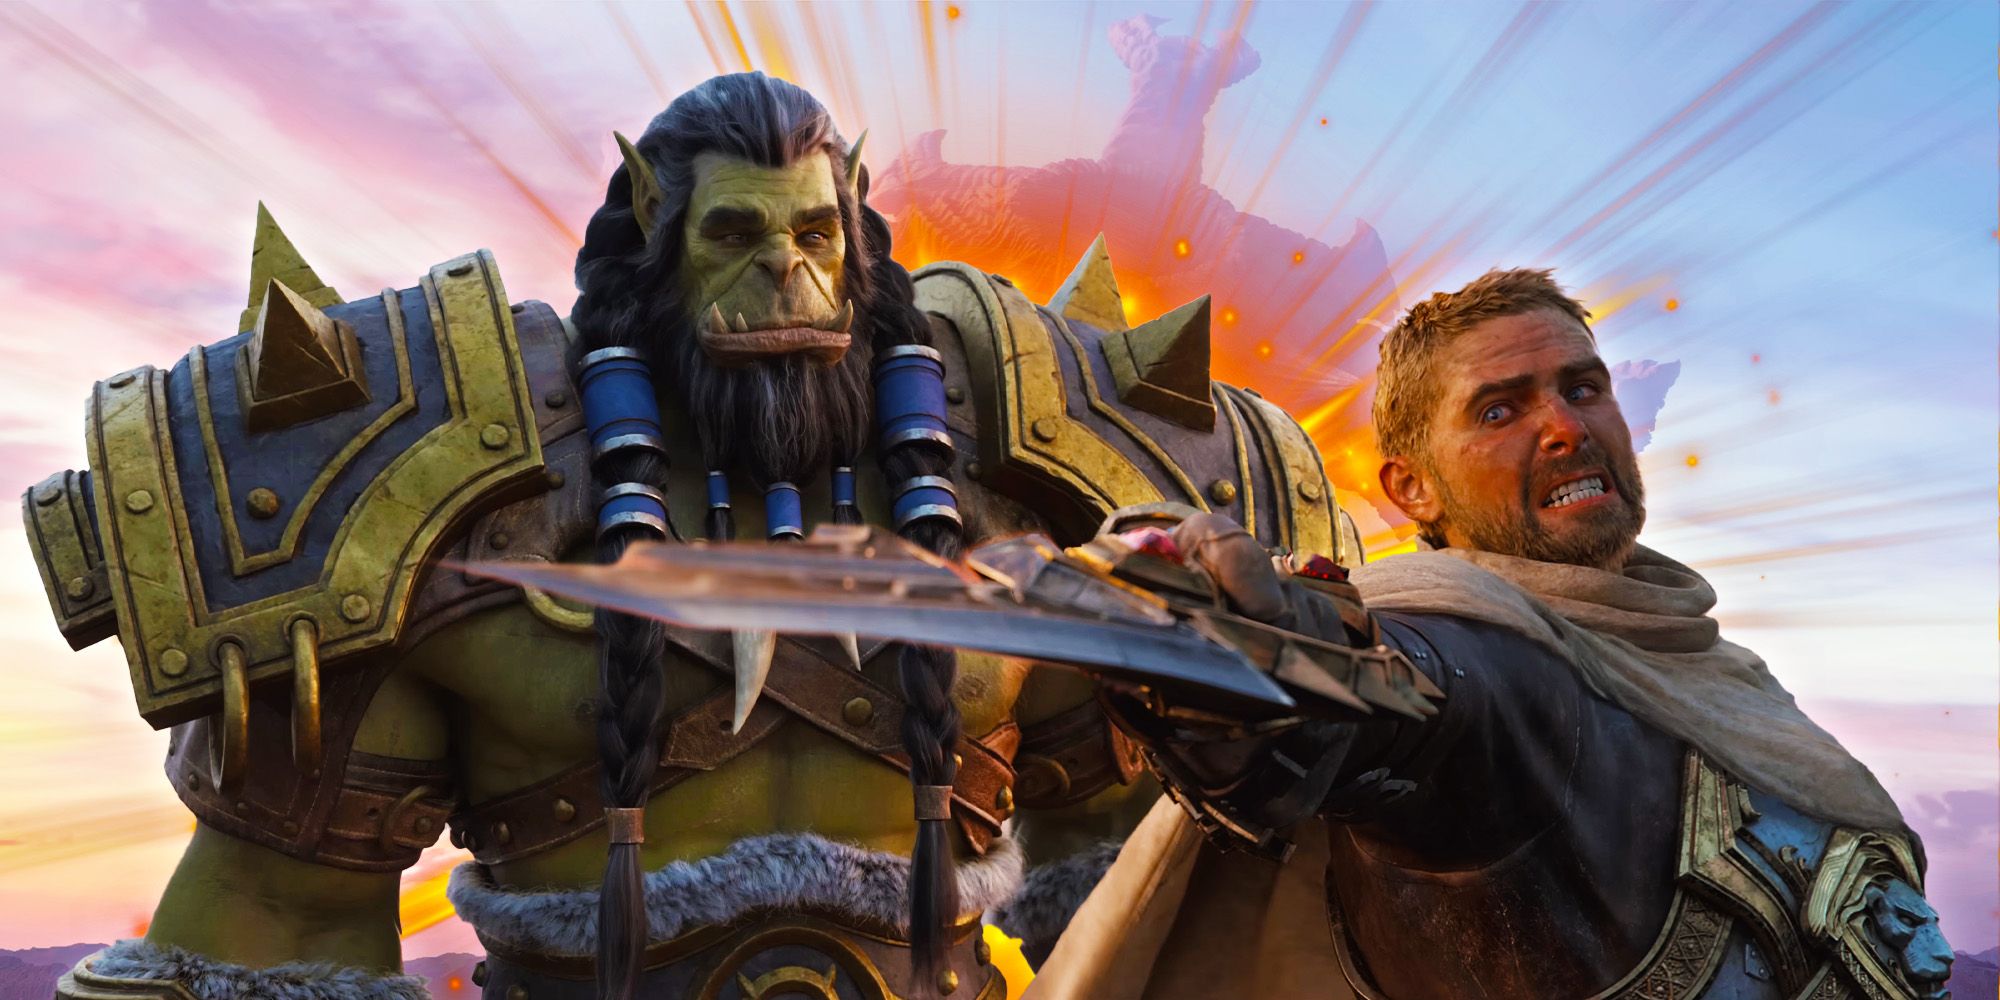 This NEW World of Warcraft Expansion Project Looks INSANE - Sargeras'  Embrace Trailer 